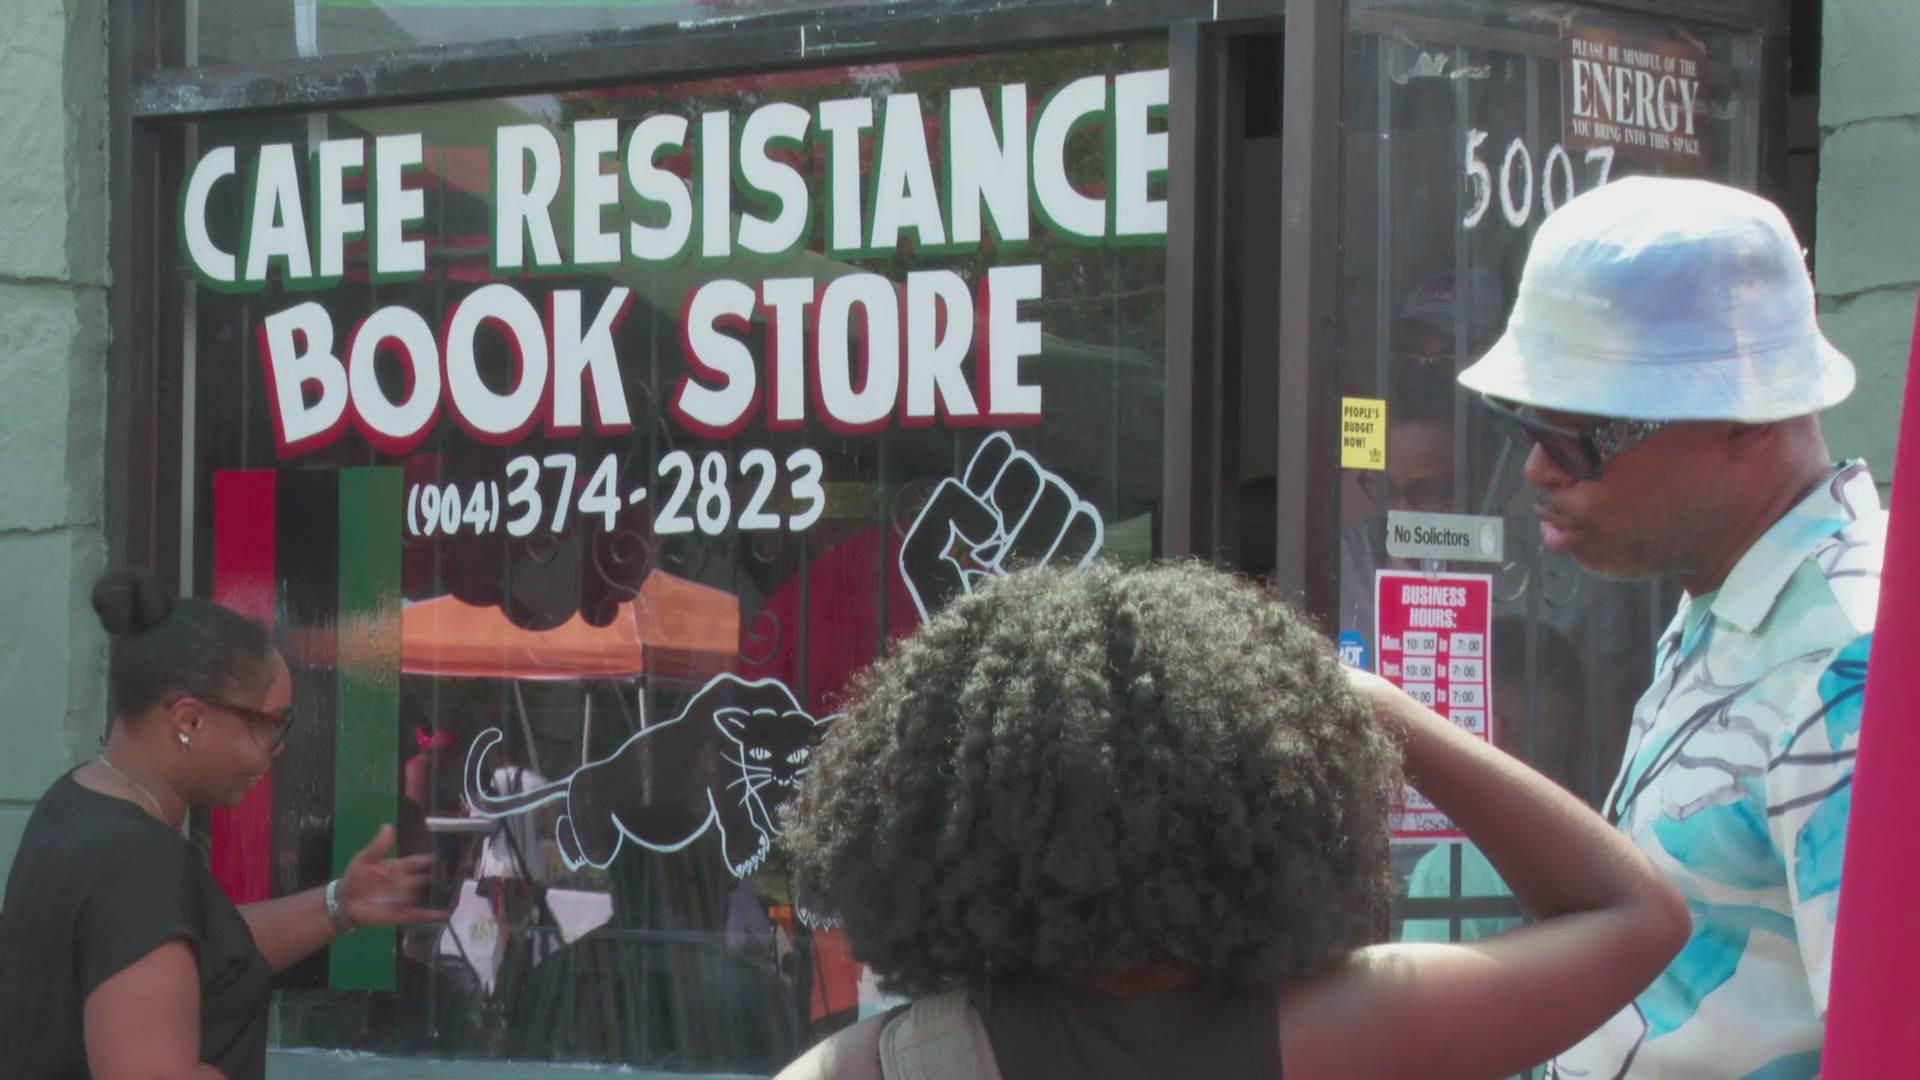 State Representative Angie Nixon opened Cafe Resistance Sunday to a large crowd. She says she intentionally included books challenged and banned under Florida law.